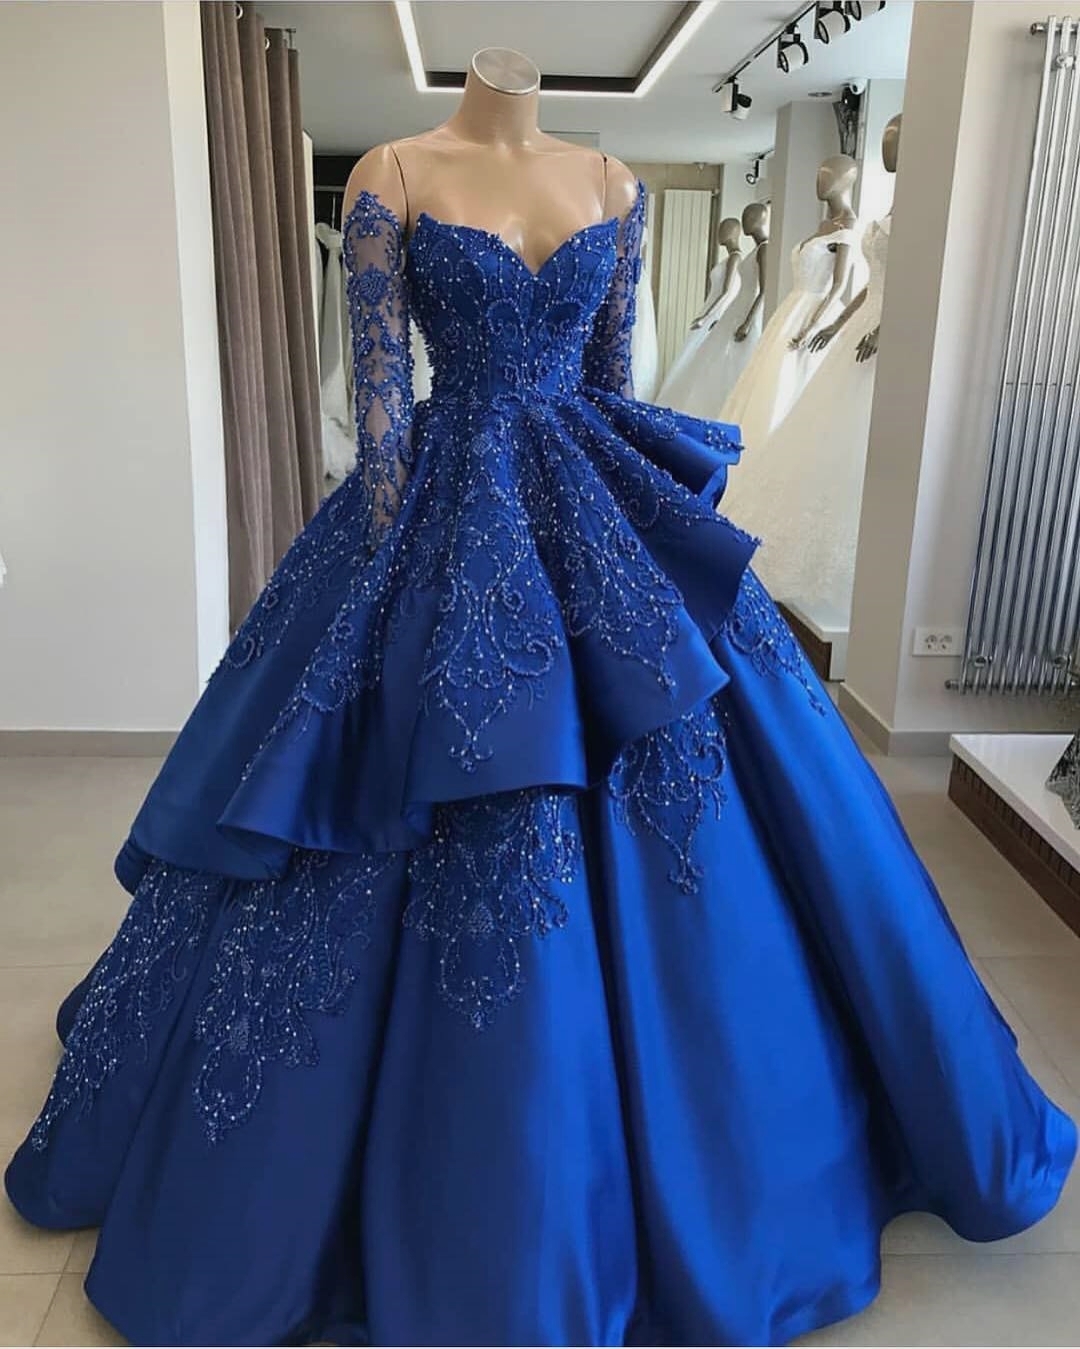 Buy Royal Blue Prom Dress, Party Prom Dress, African Women Dresses, Women  Fashion, Prom Dresses, Dresses for Women, Wedding Dress, Evening Dress  Online in India - Etsy